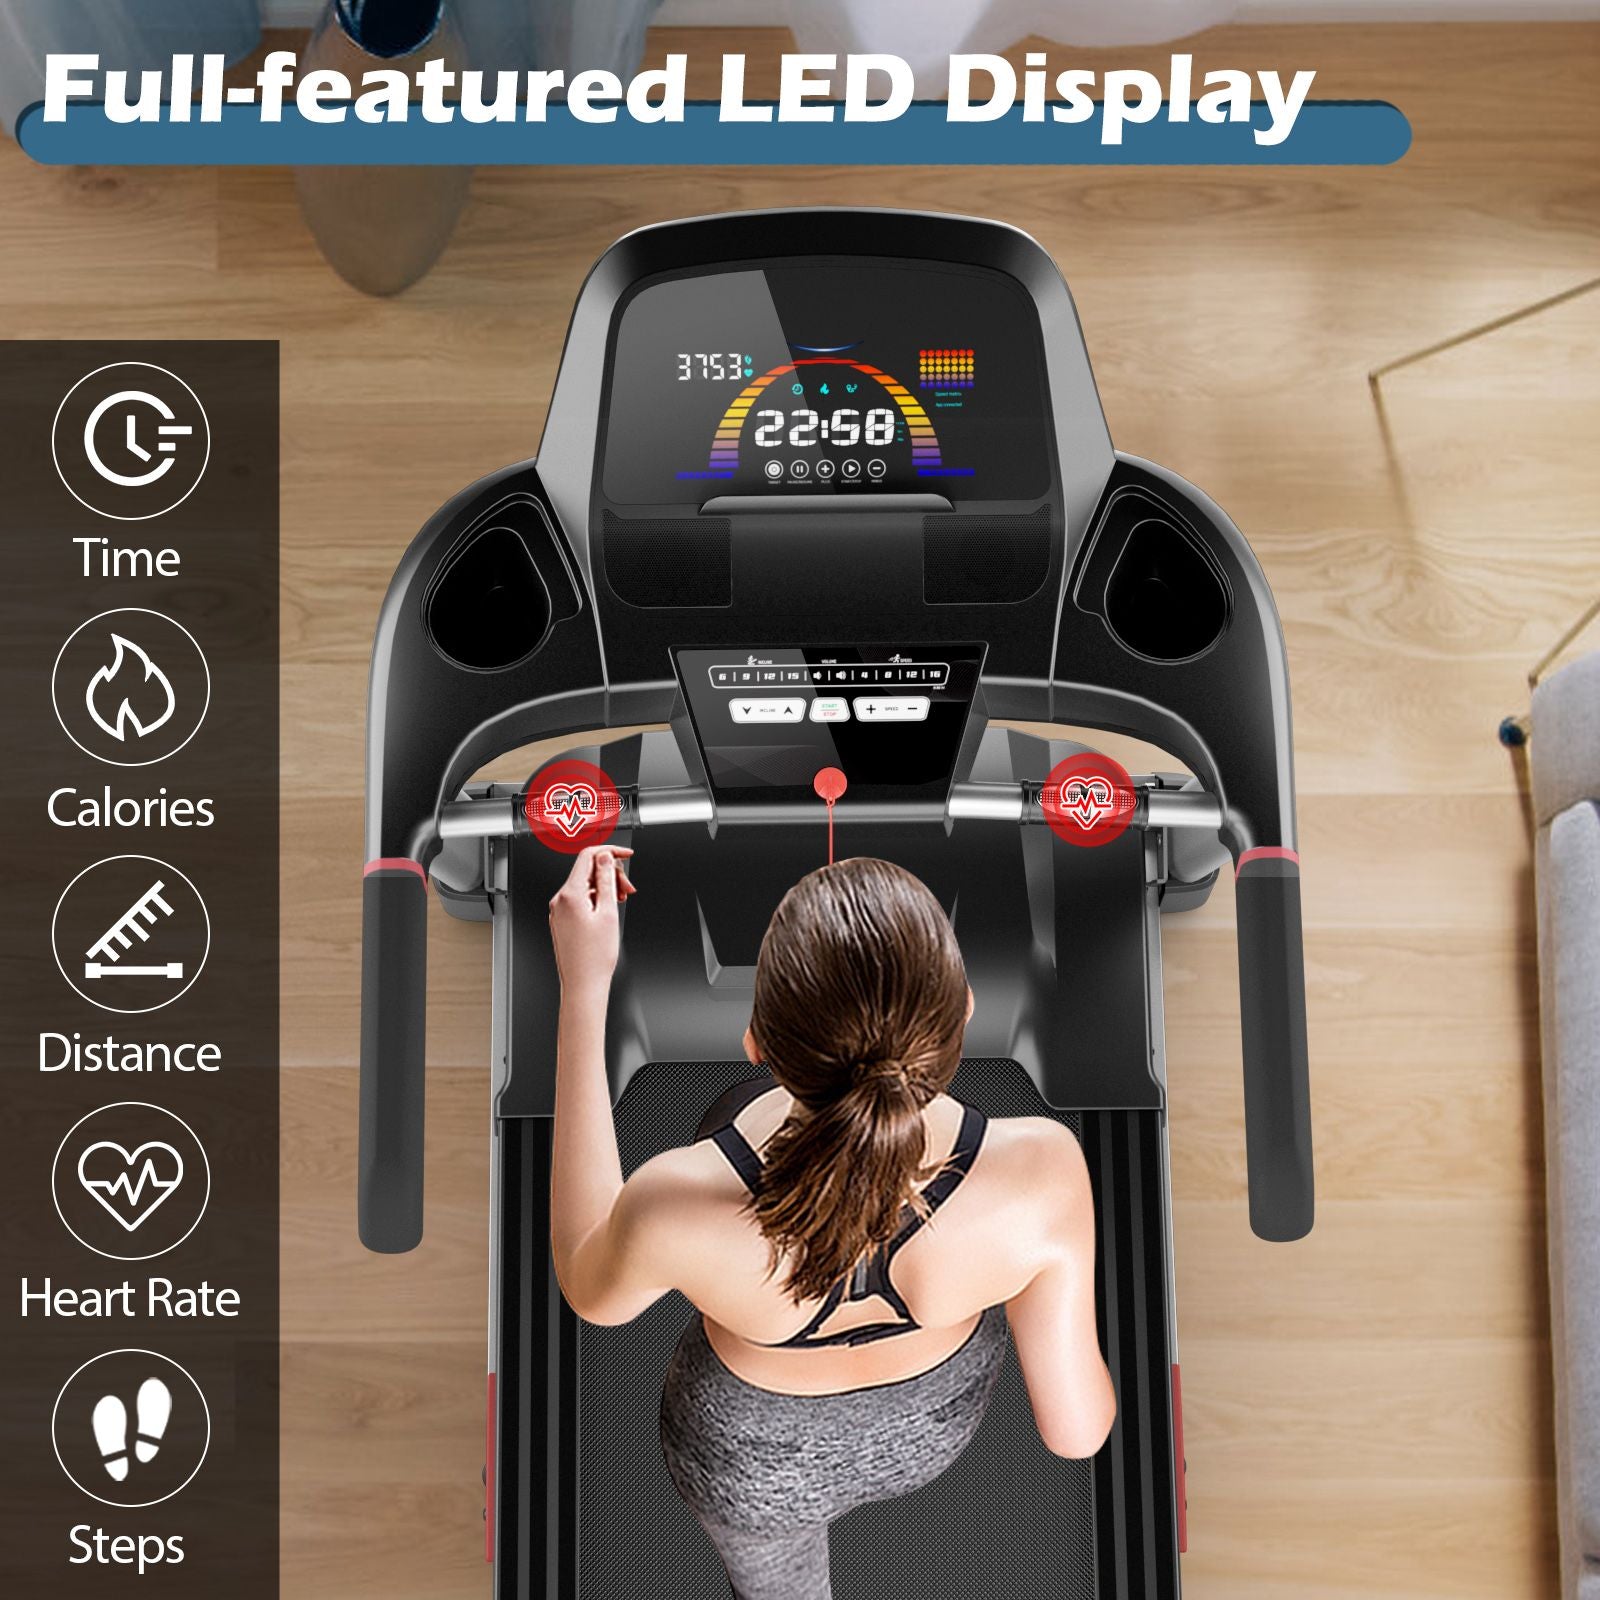 4.75HP Folding Treadmill with 20 Preset Programs and Bluetooth Speakers